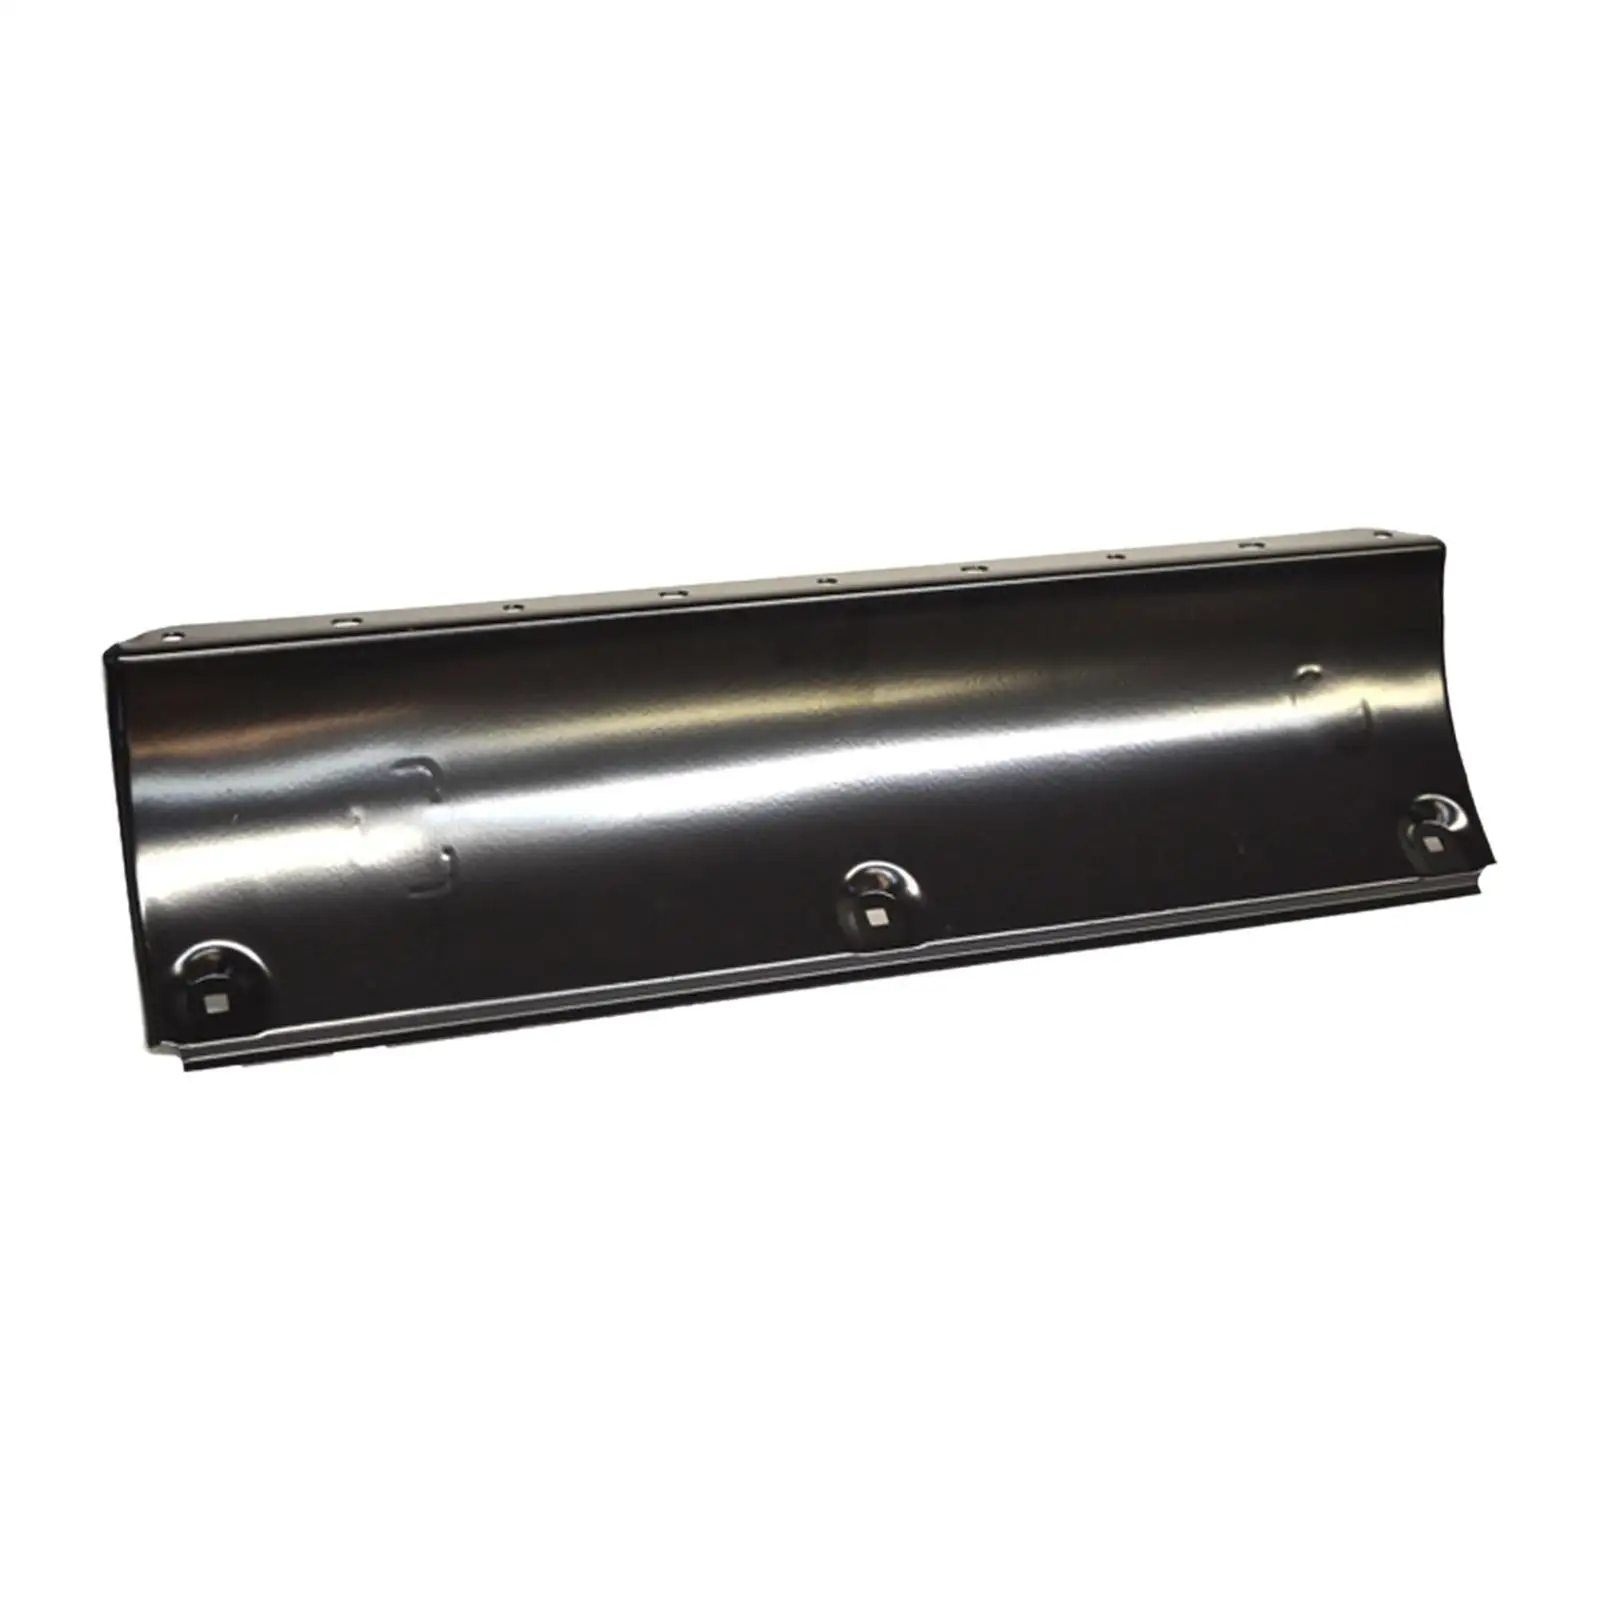 Lower Housing Replacement Snow Blowers Accessories 119-1551 for Ccr2000 Ccr3650 Ccr2450 Easy Installation Premium